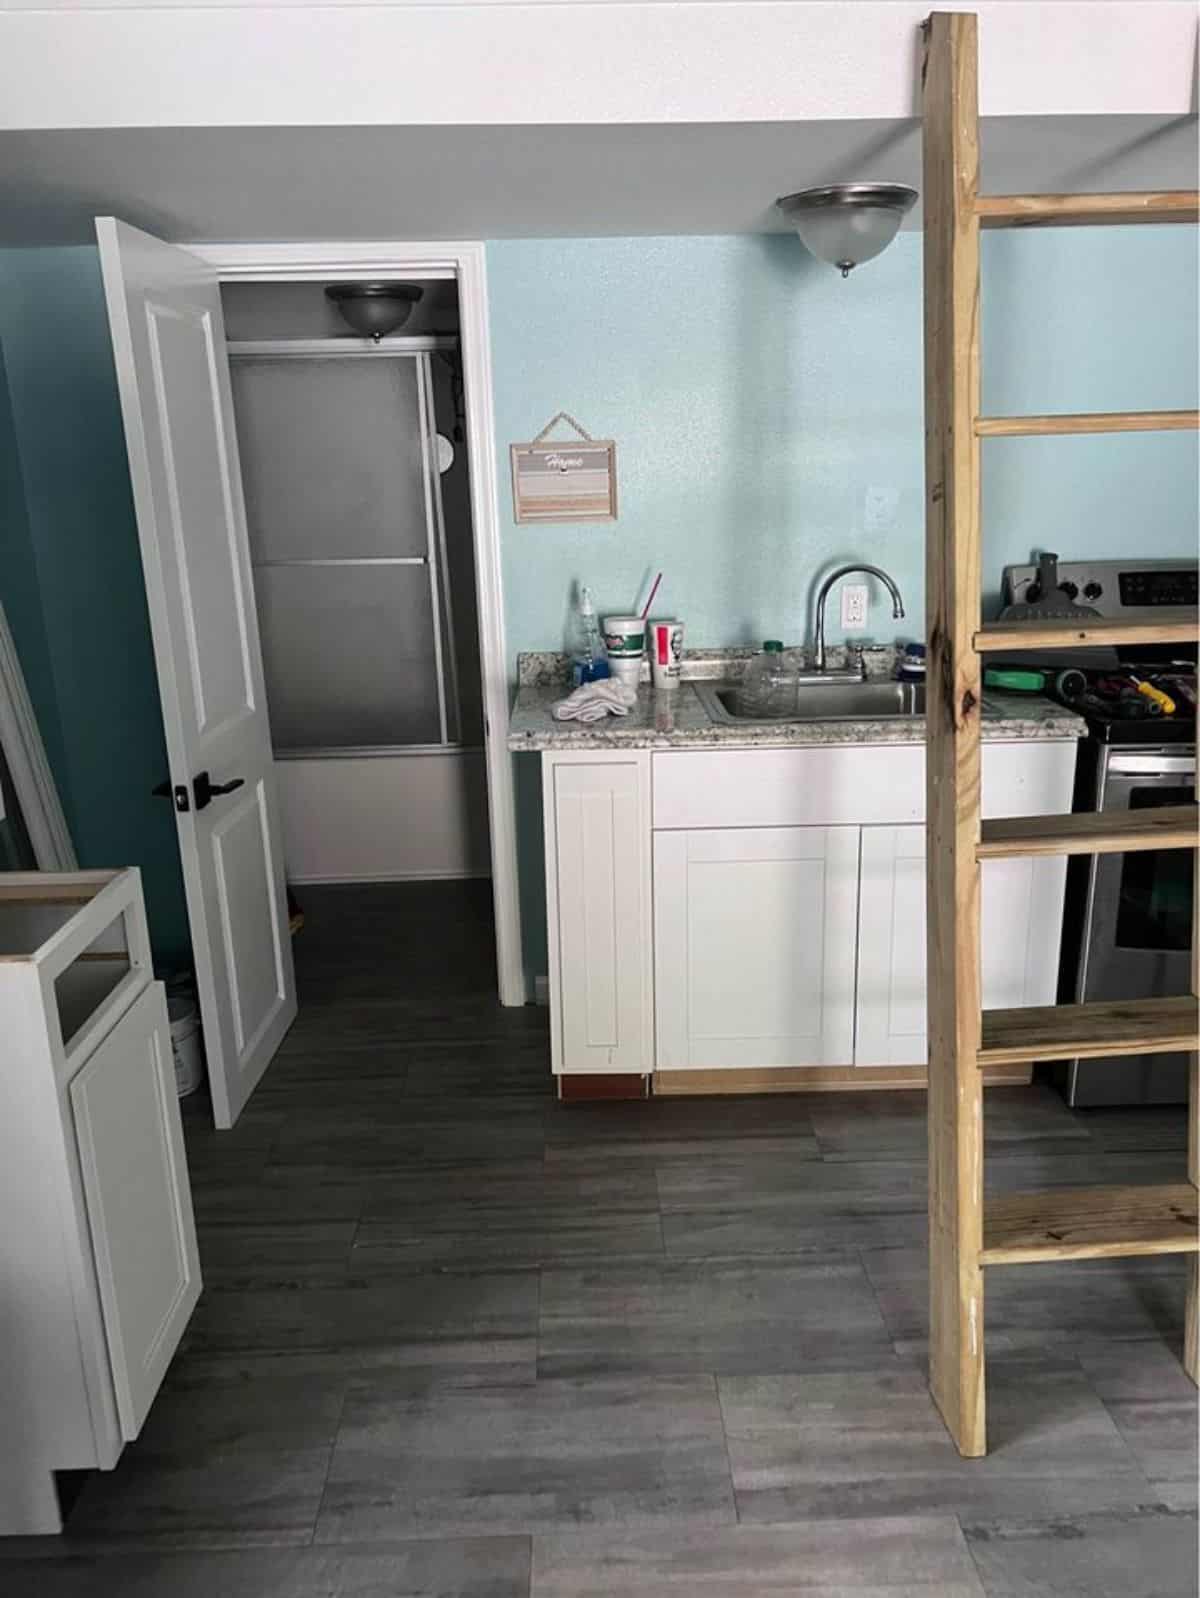 Kitchen area and ladder of tiny converted home